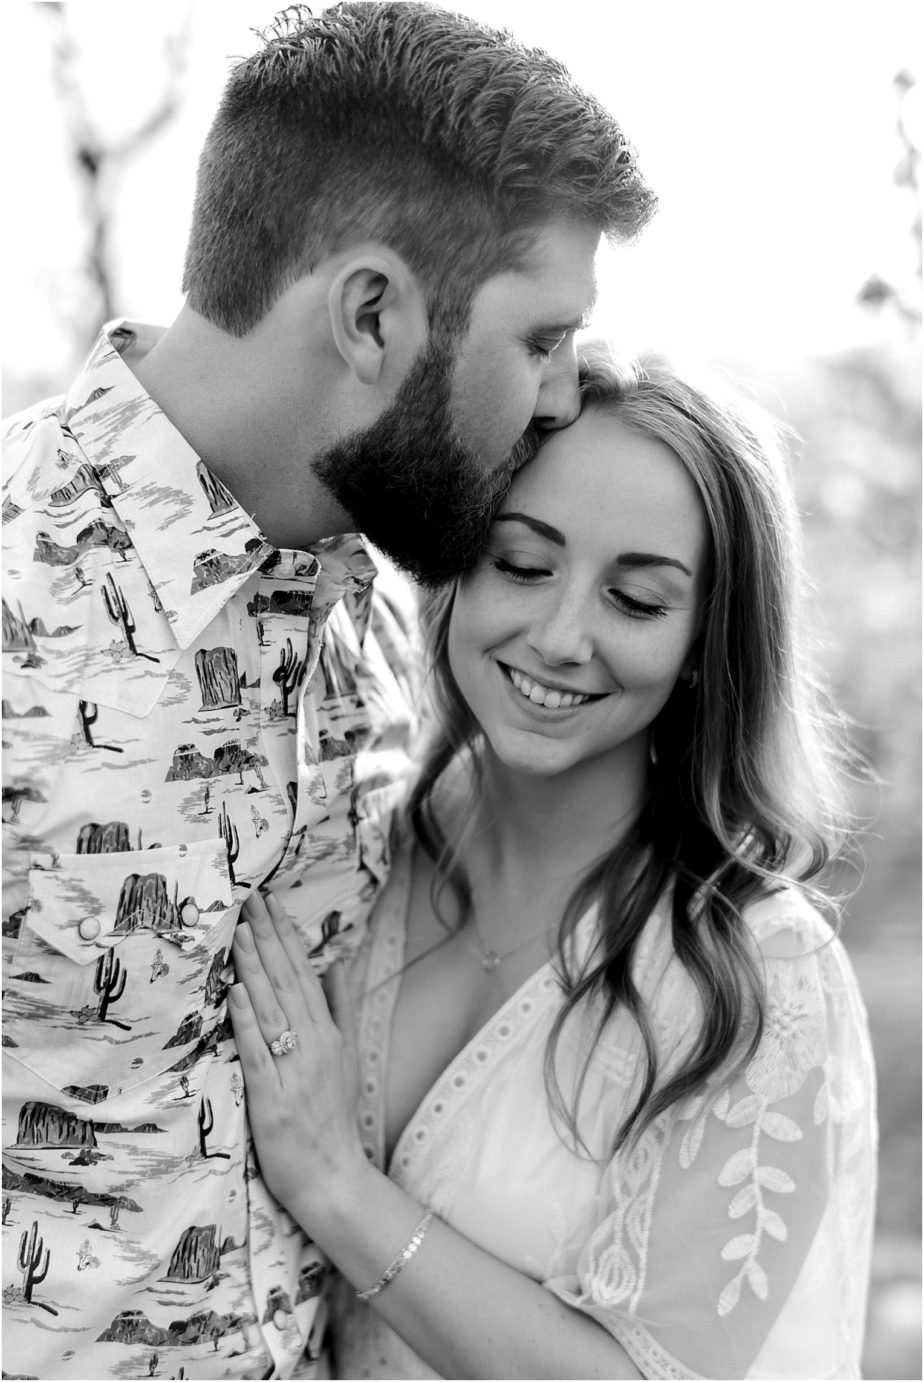 eastern washington engagement session PNW photographer Travis and arianna kissing in a cherry orchard